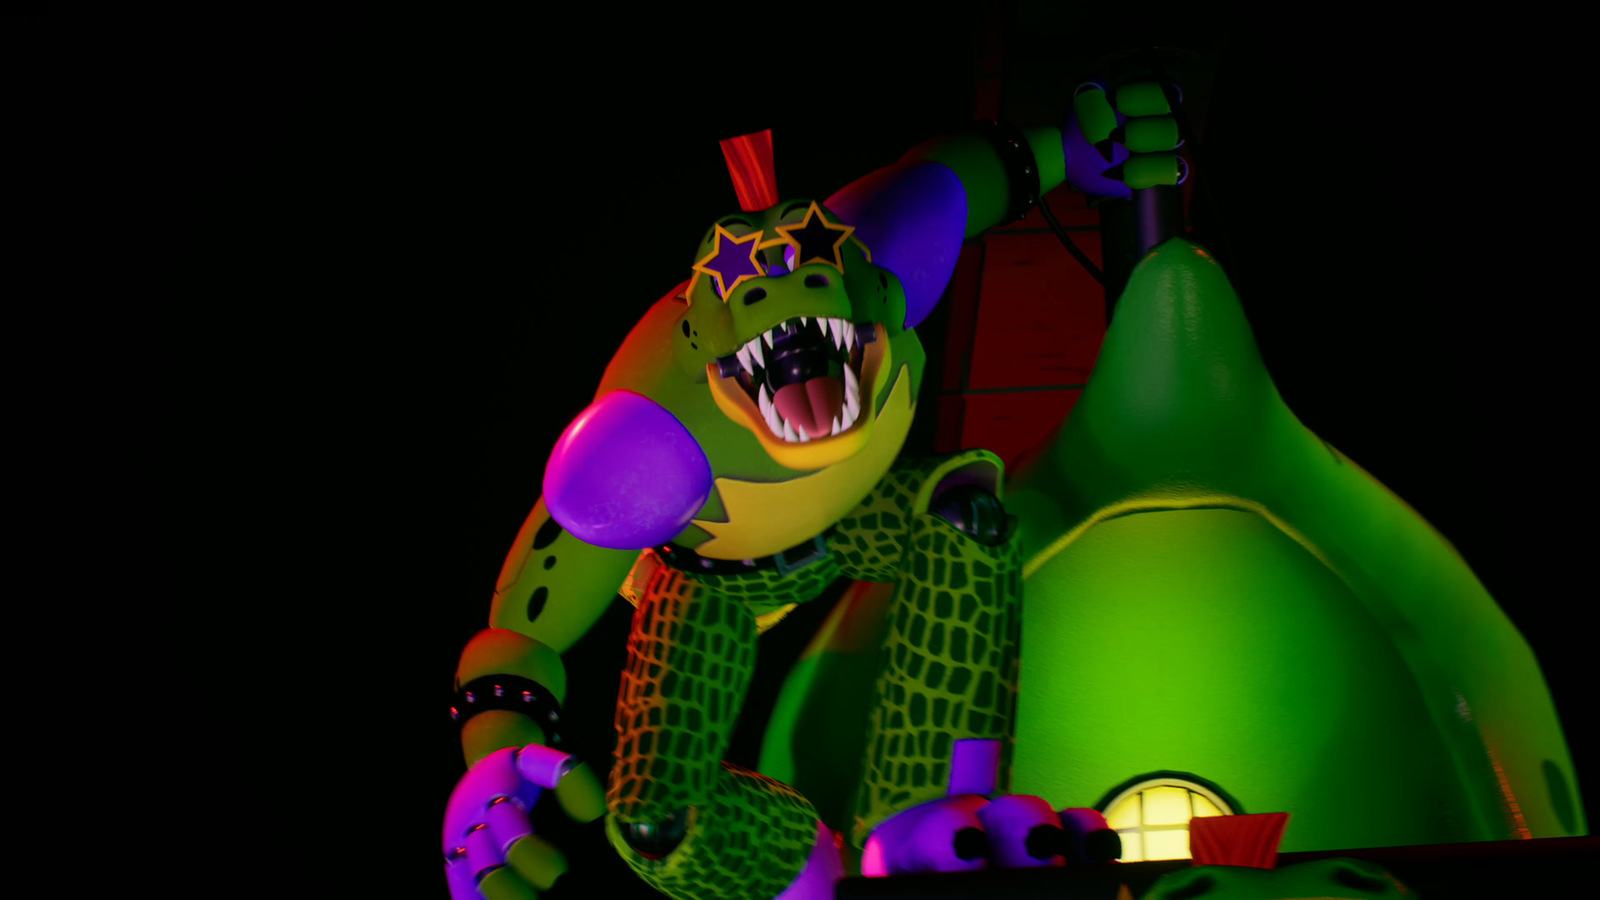 Five Nights At Freddy's: Security Breach is out now